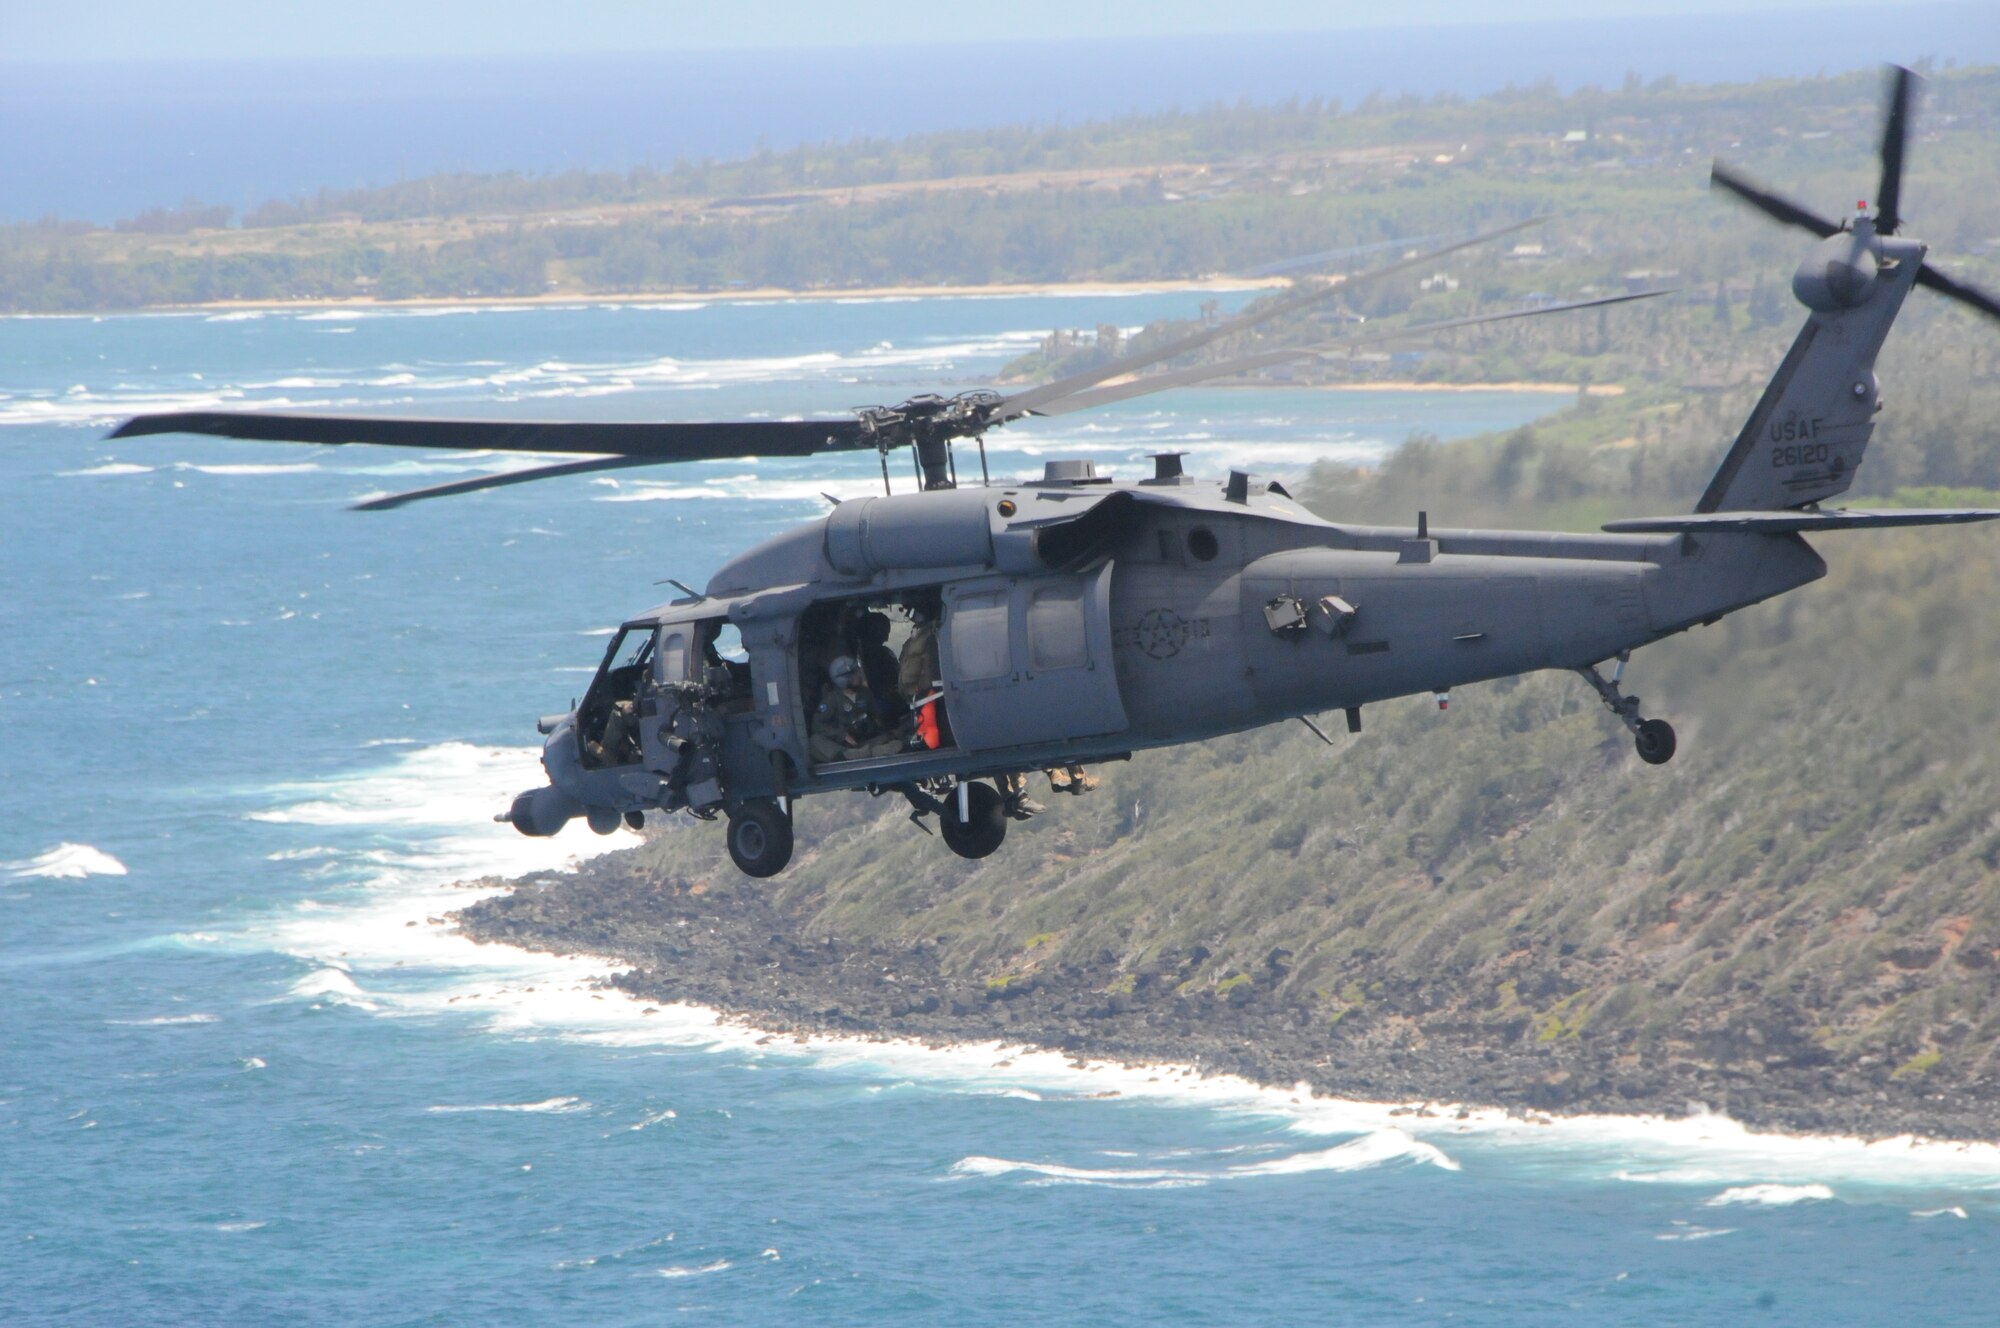 California Air National HH-60G Pave Hawk rescue helicopter from the 129th Rescue Wing, Moffet Field, Calif. conducts a Combat Search and Rescue(CSAR) personnel recovery mission at the Rim of the Pacific exercise in an isolated area on the island of Oahu, Hawaii on July 23, 2012. During the exercise the Pararescue Jumpers (PJs) make contact with the downed aviator, treat his immediate medical needs and transport him back to safety as the 144th Fighter Wing, Fresno, Calif. provide Rescue Combat Air Patrol (RESCAP) with their F-16 fighter jets above in the blue Hawaiian skies. (Air National Guard photo by Master Sgt. David J. Loeffler)